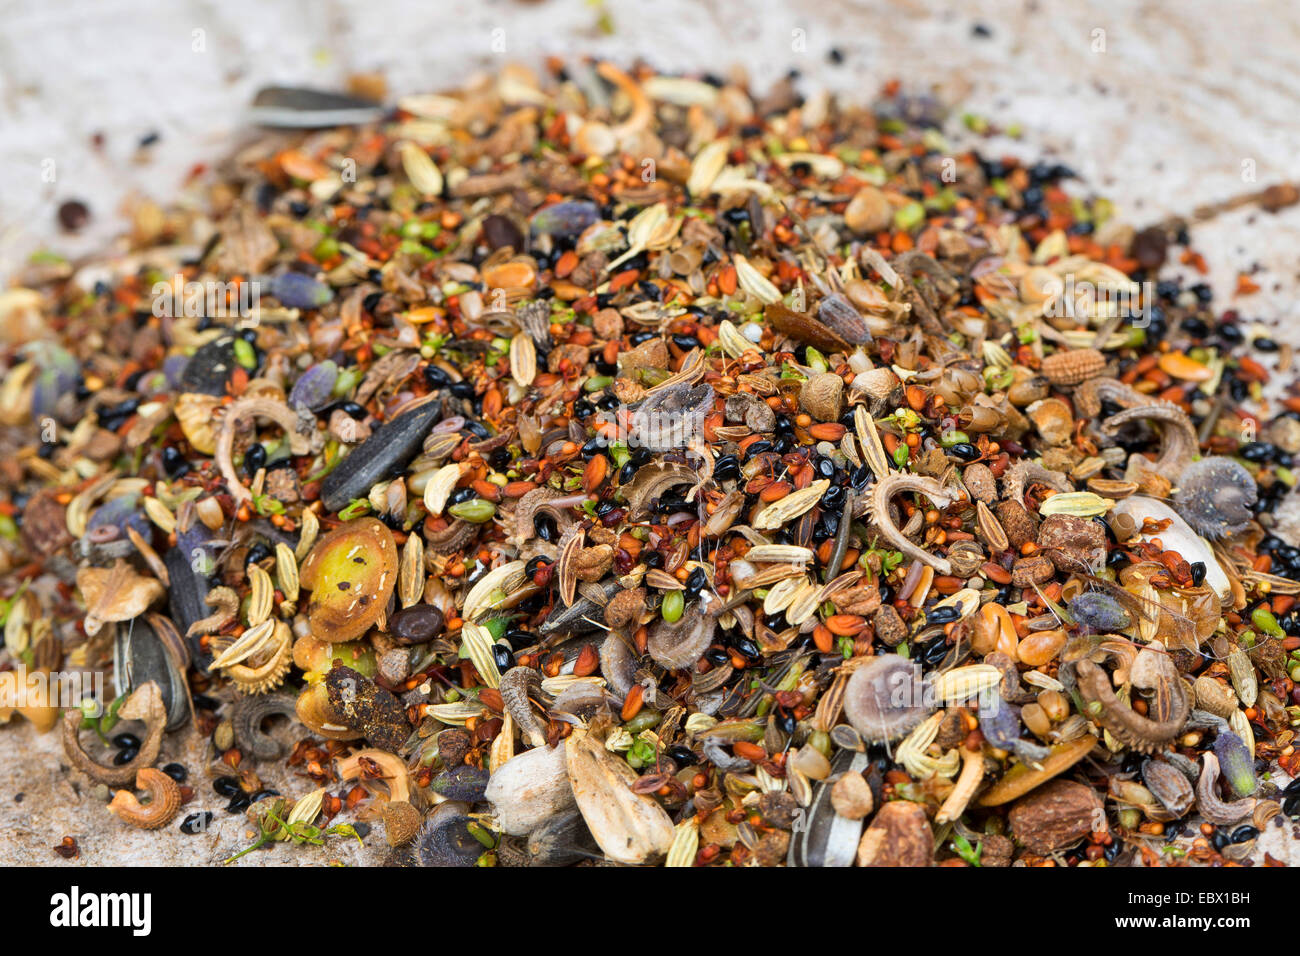 different seeds and fruits for making a seedbomb, Germany Stock Photo